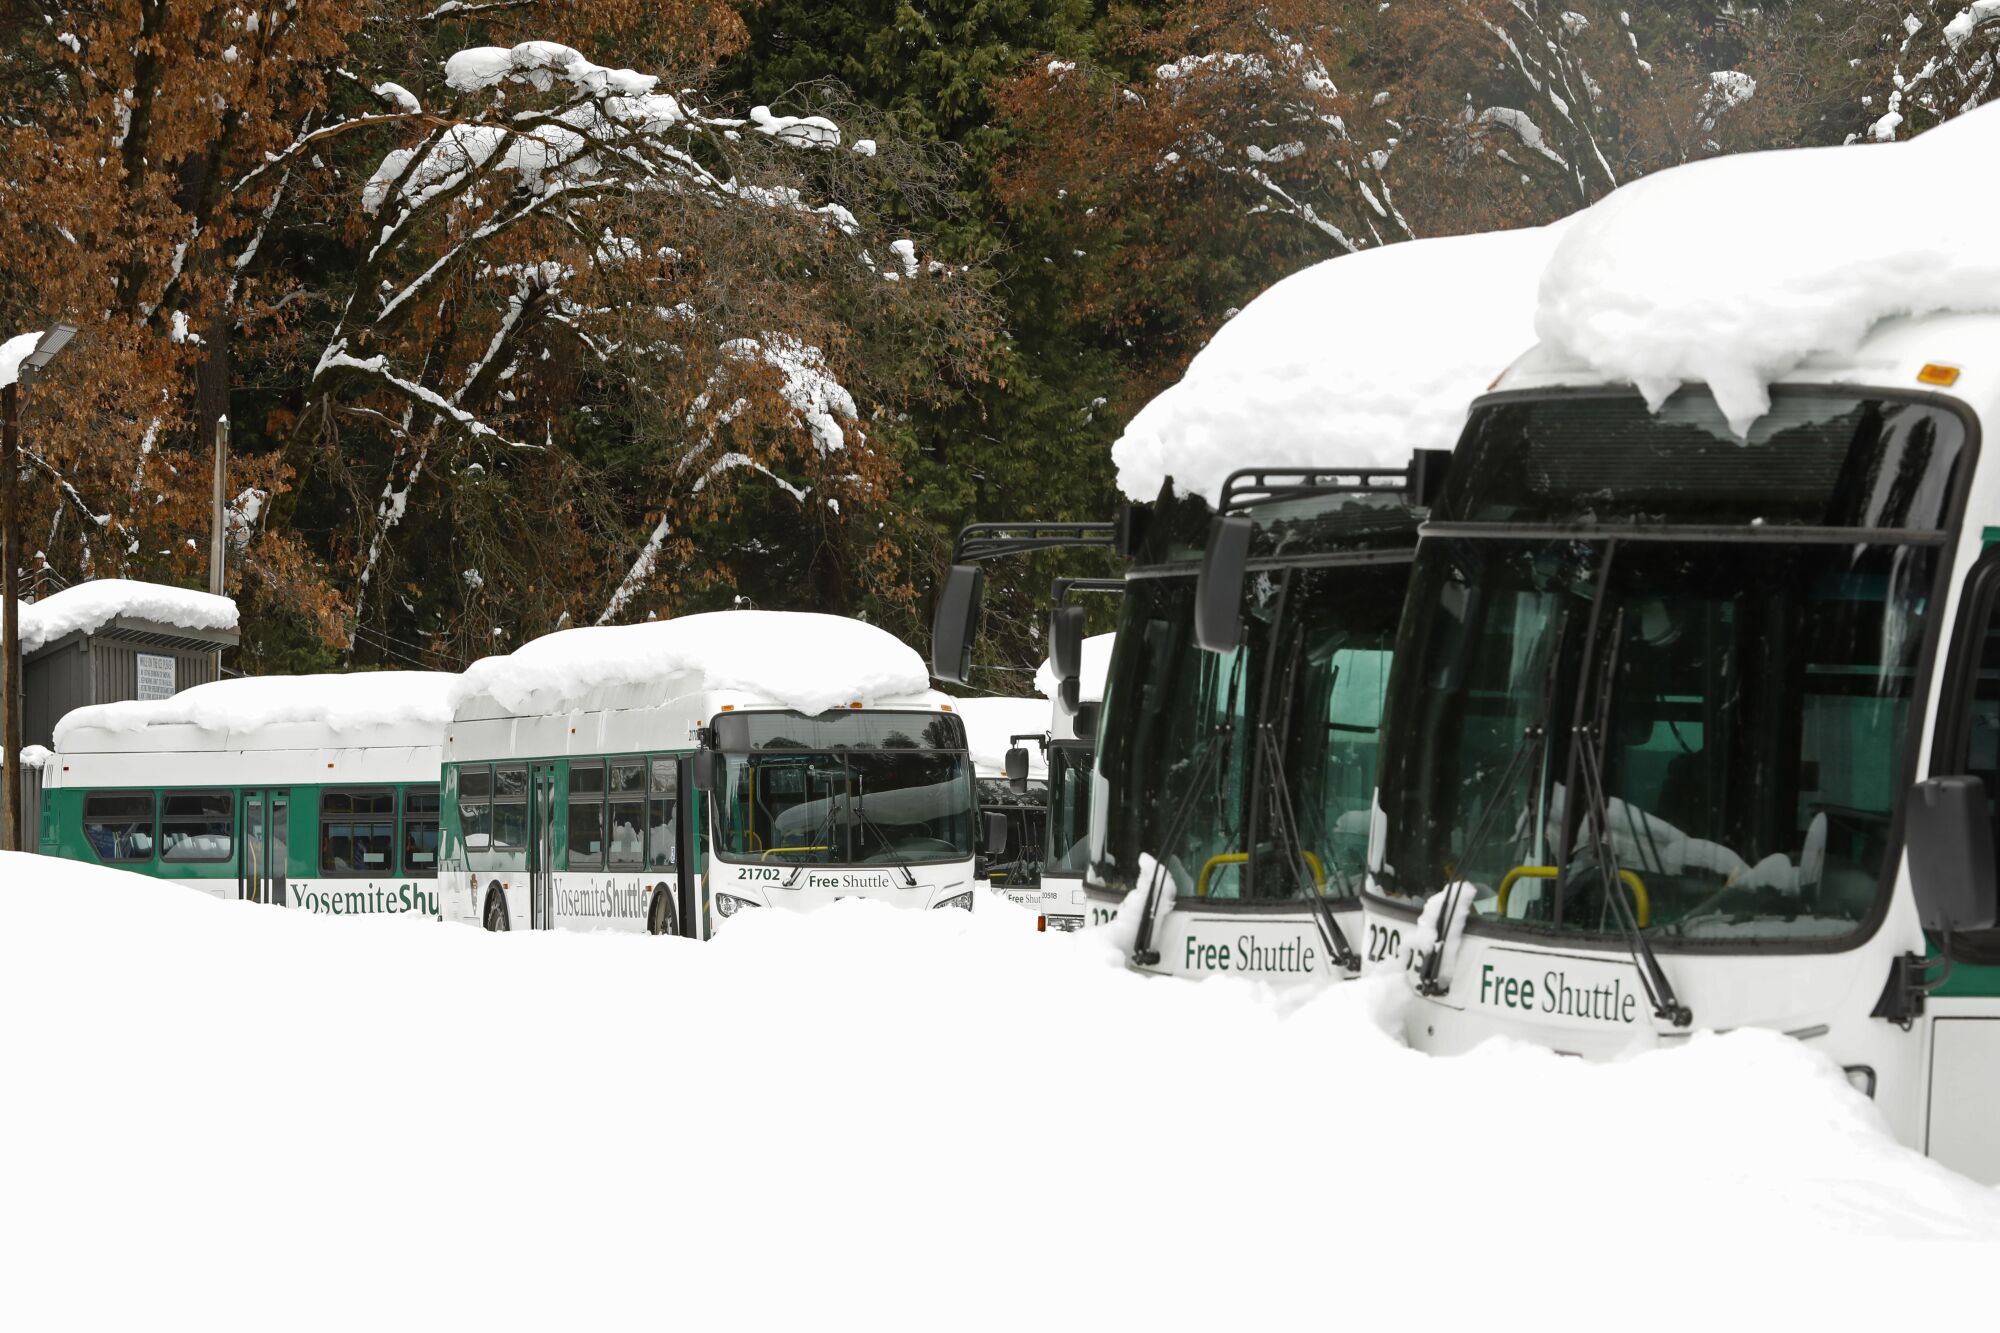 Shuttle buses buried under snow and covered with snow.